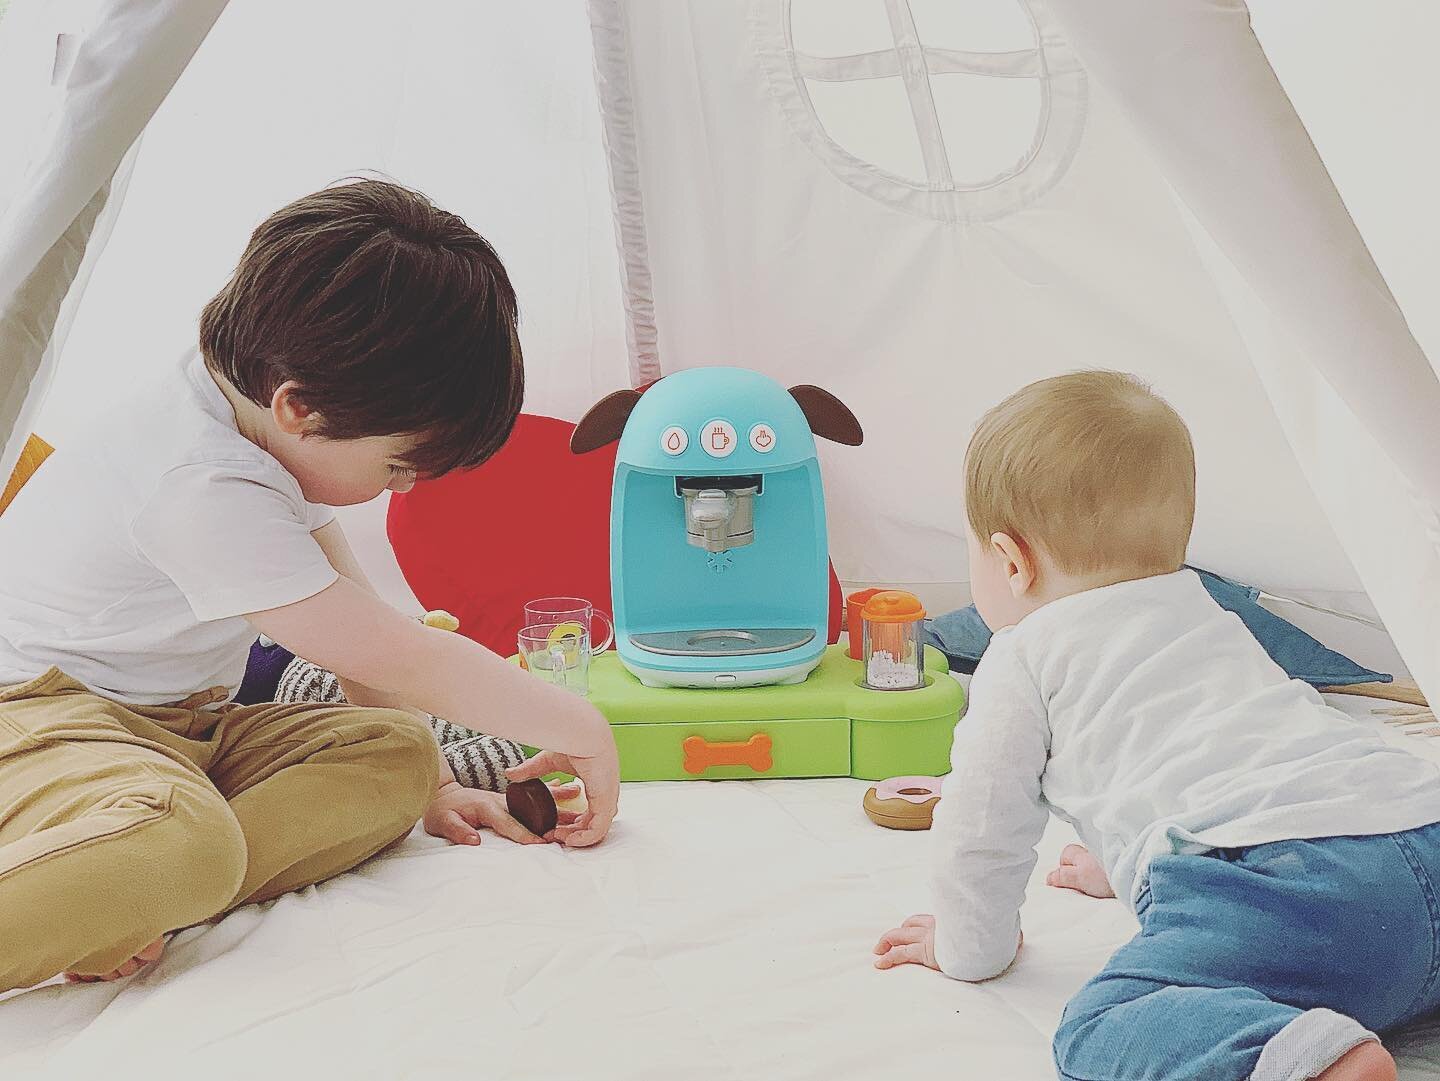 All 3 of the boys love this coffee machine from @skiphop.aunz 
If only they could get up in the morning and make actual coffee for us...
Use code &lsquo;SIMONWHITE&rsquo; for 15% off full priced items @thestorknest